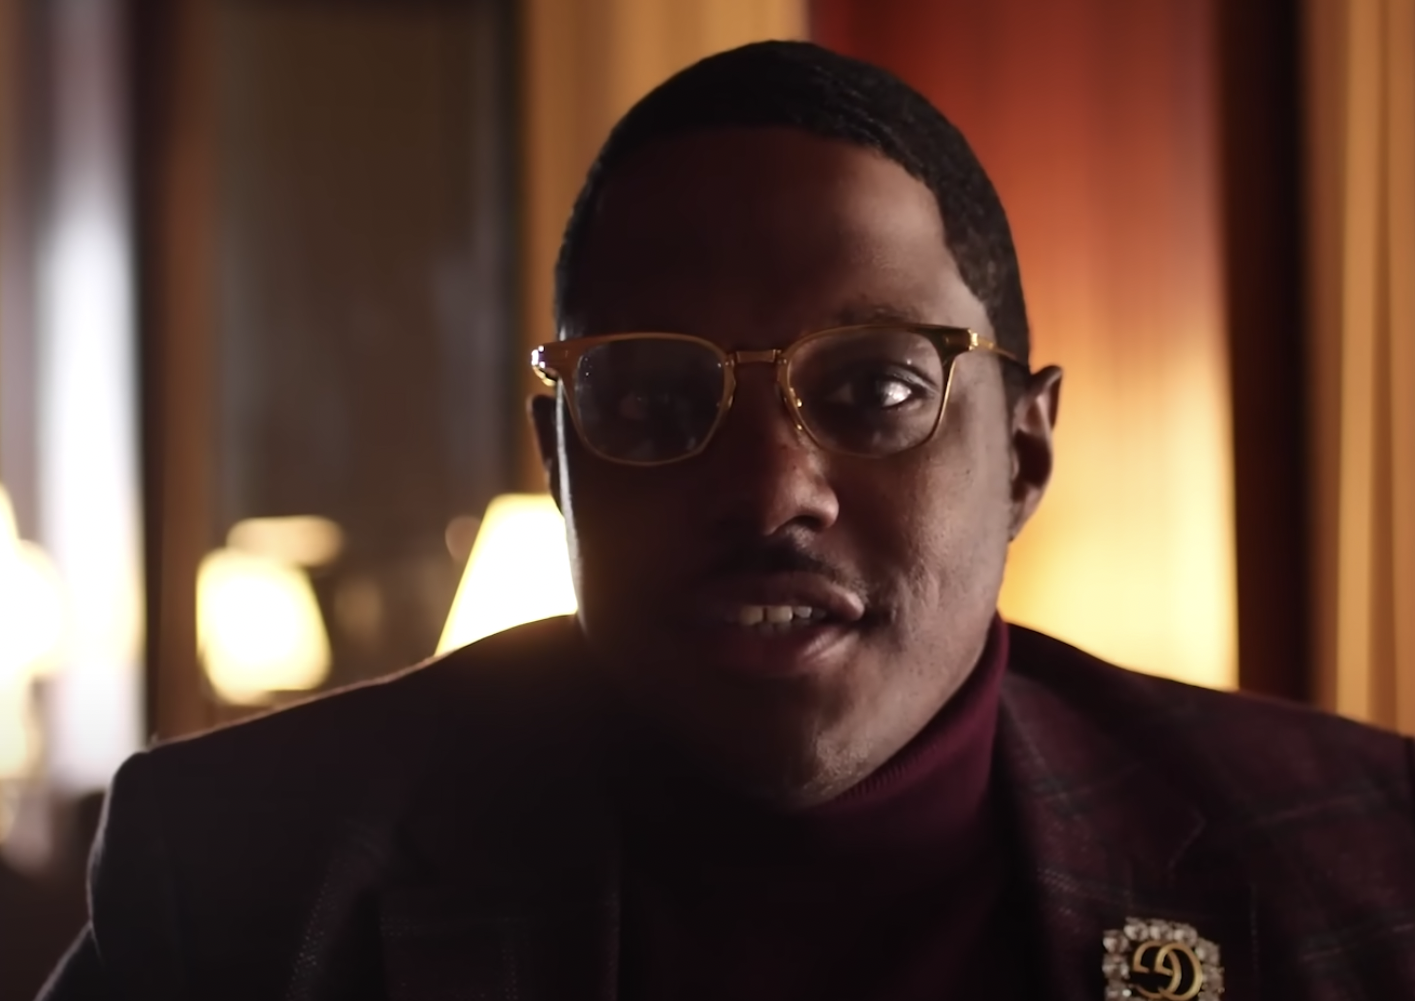 Diddy Claims Ma$e Owes Him $3 Million, Calls Him A Fake Pastor –